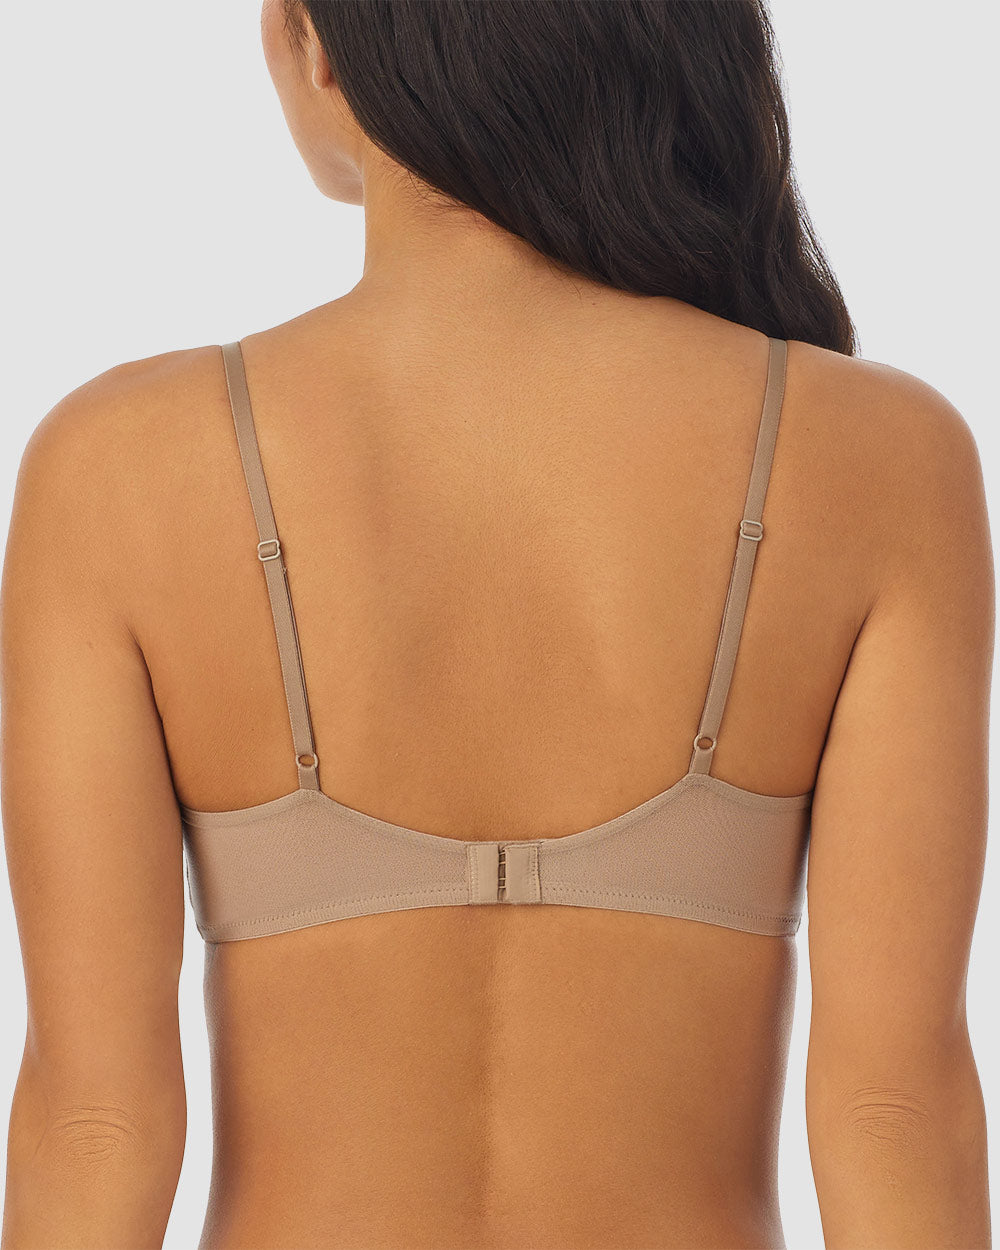 A lady wearing mocha next to nothing bralette.